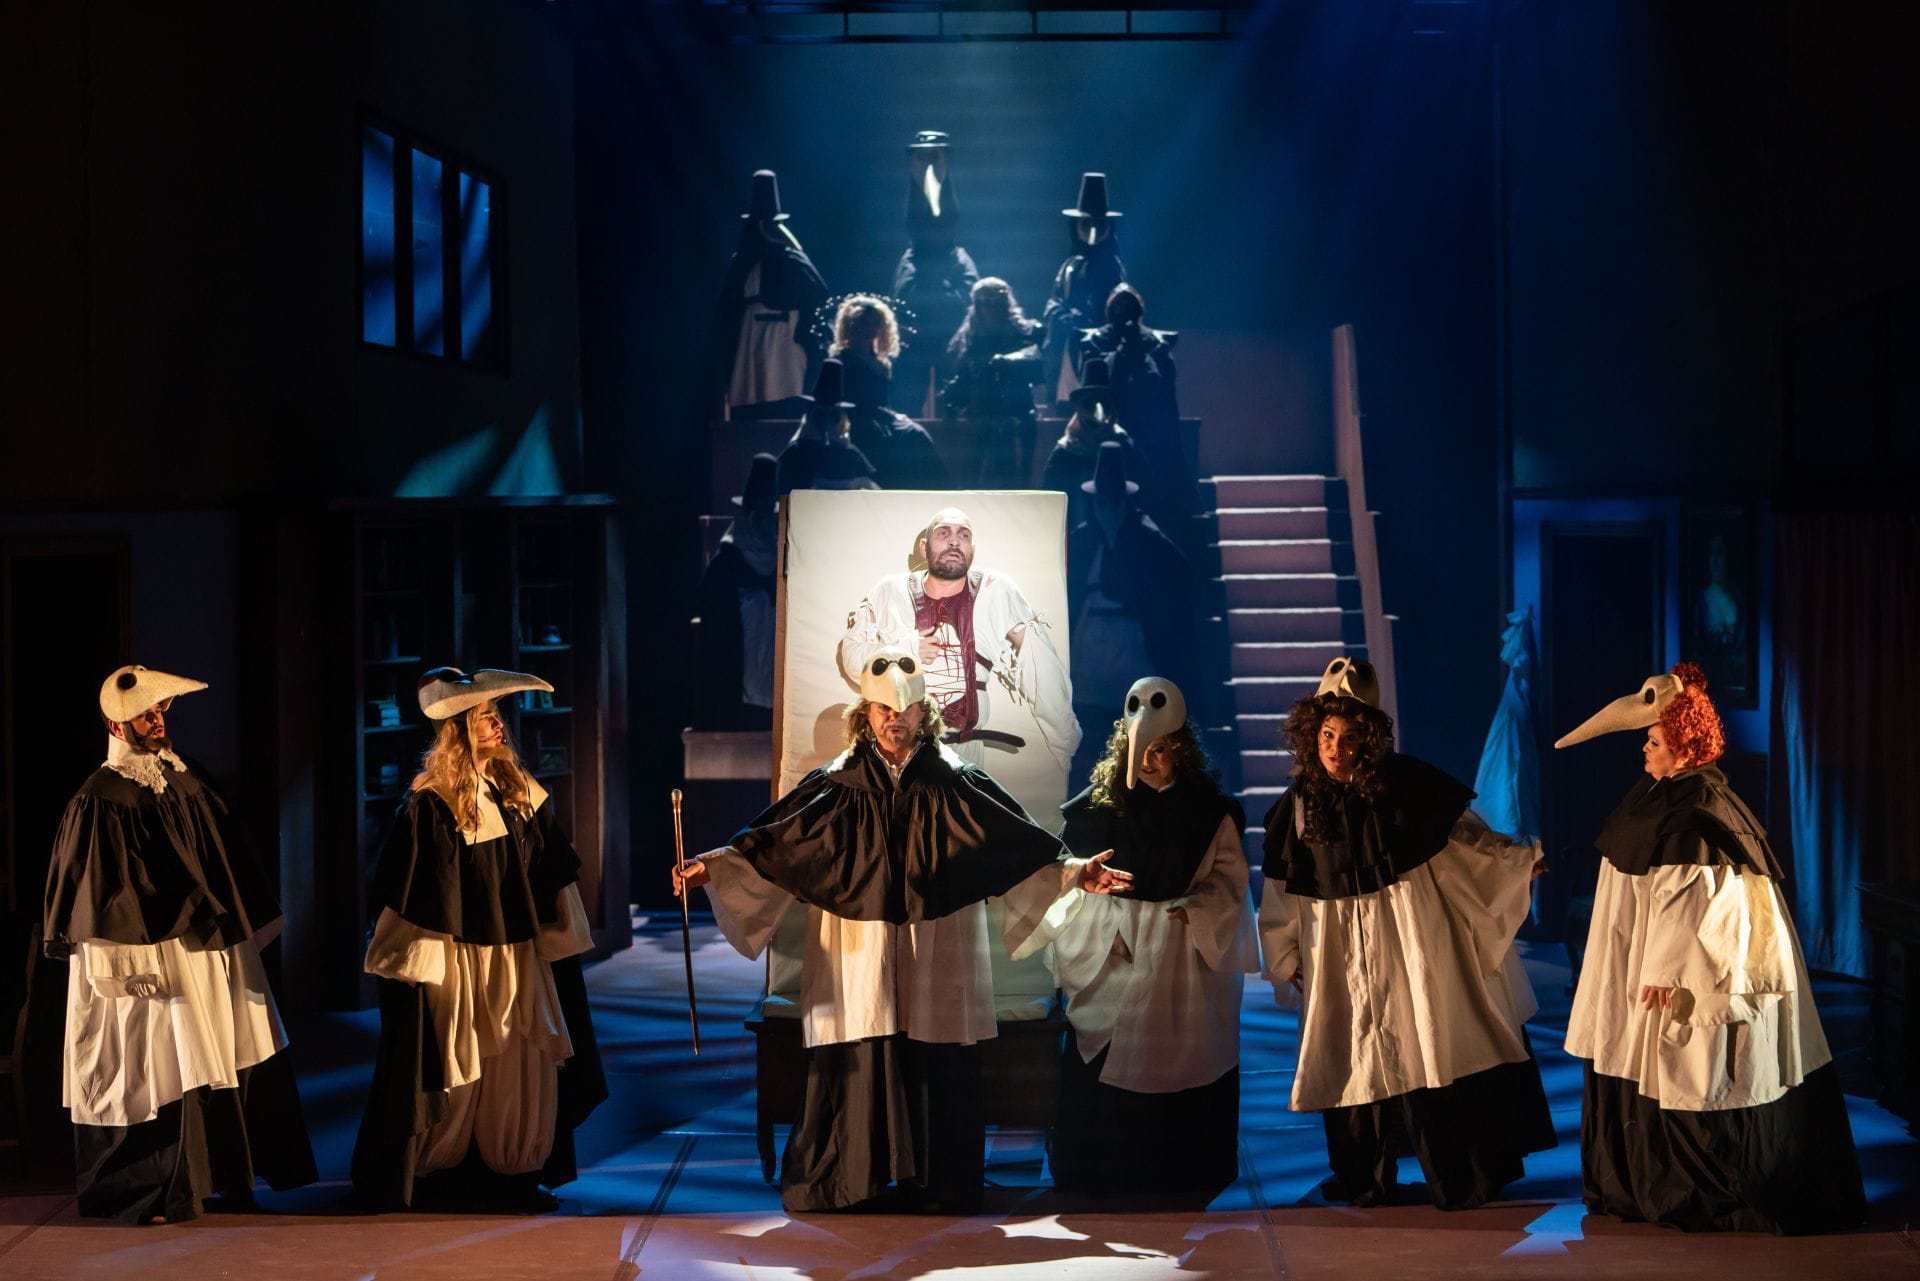 Hungarian State Opera – The Imaginary Invalid live on OperaVision